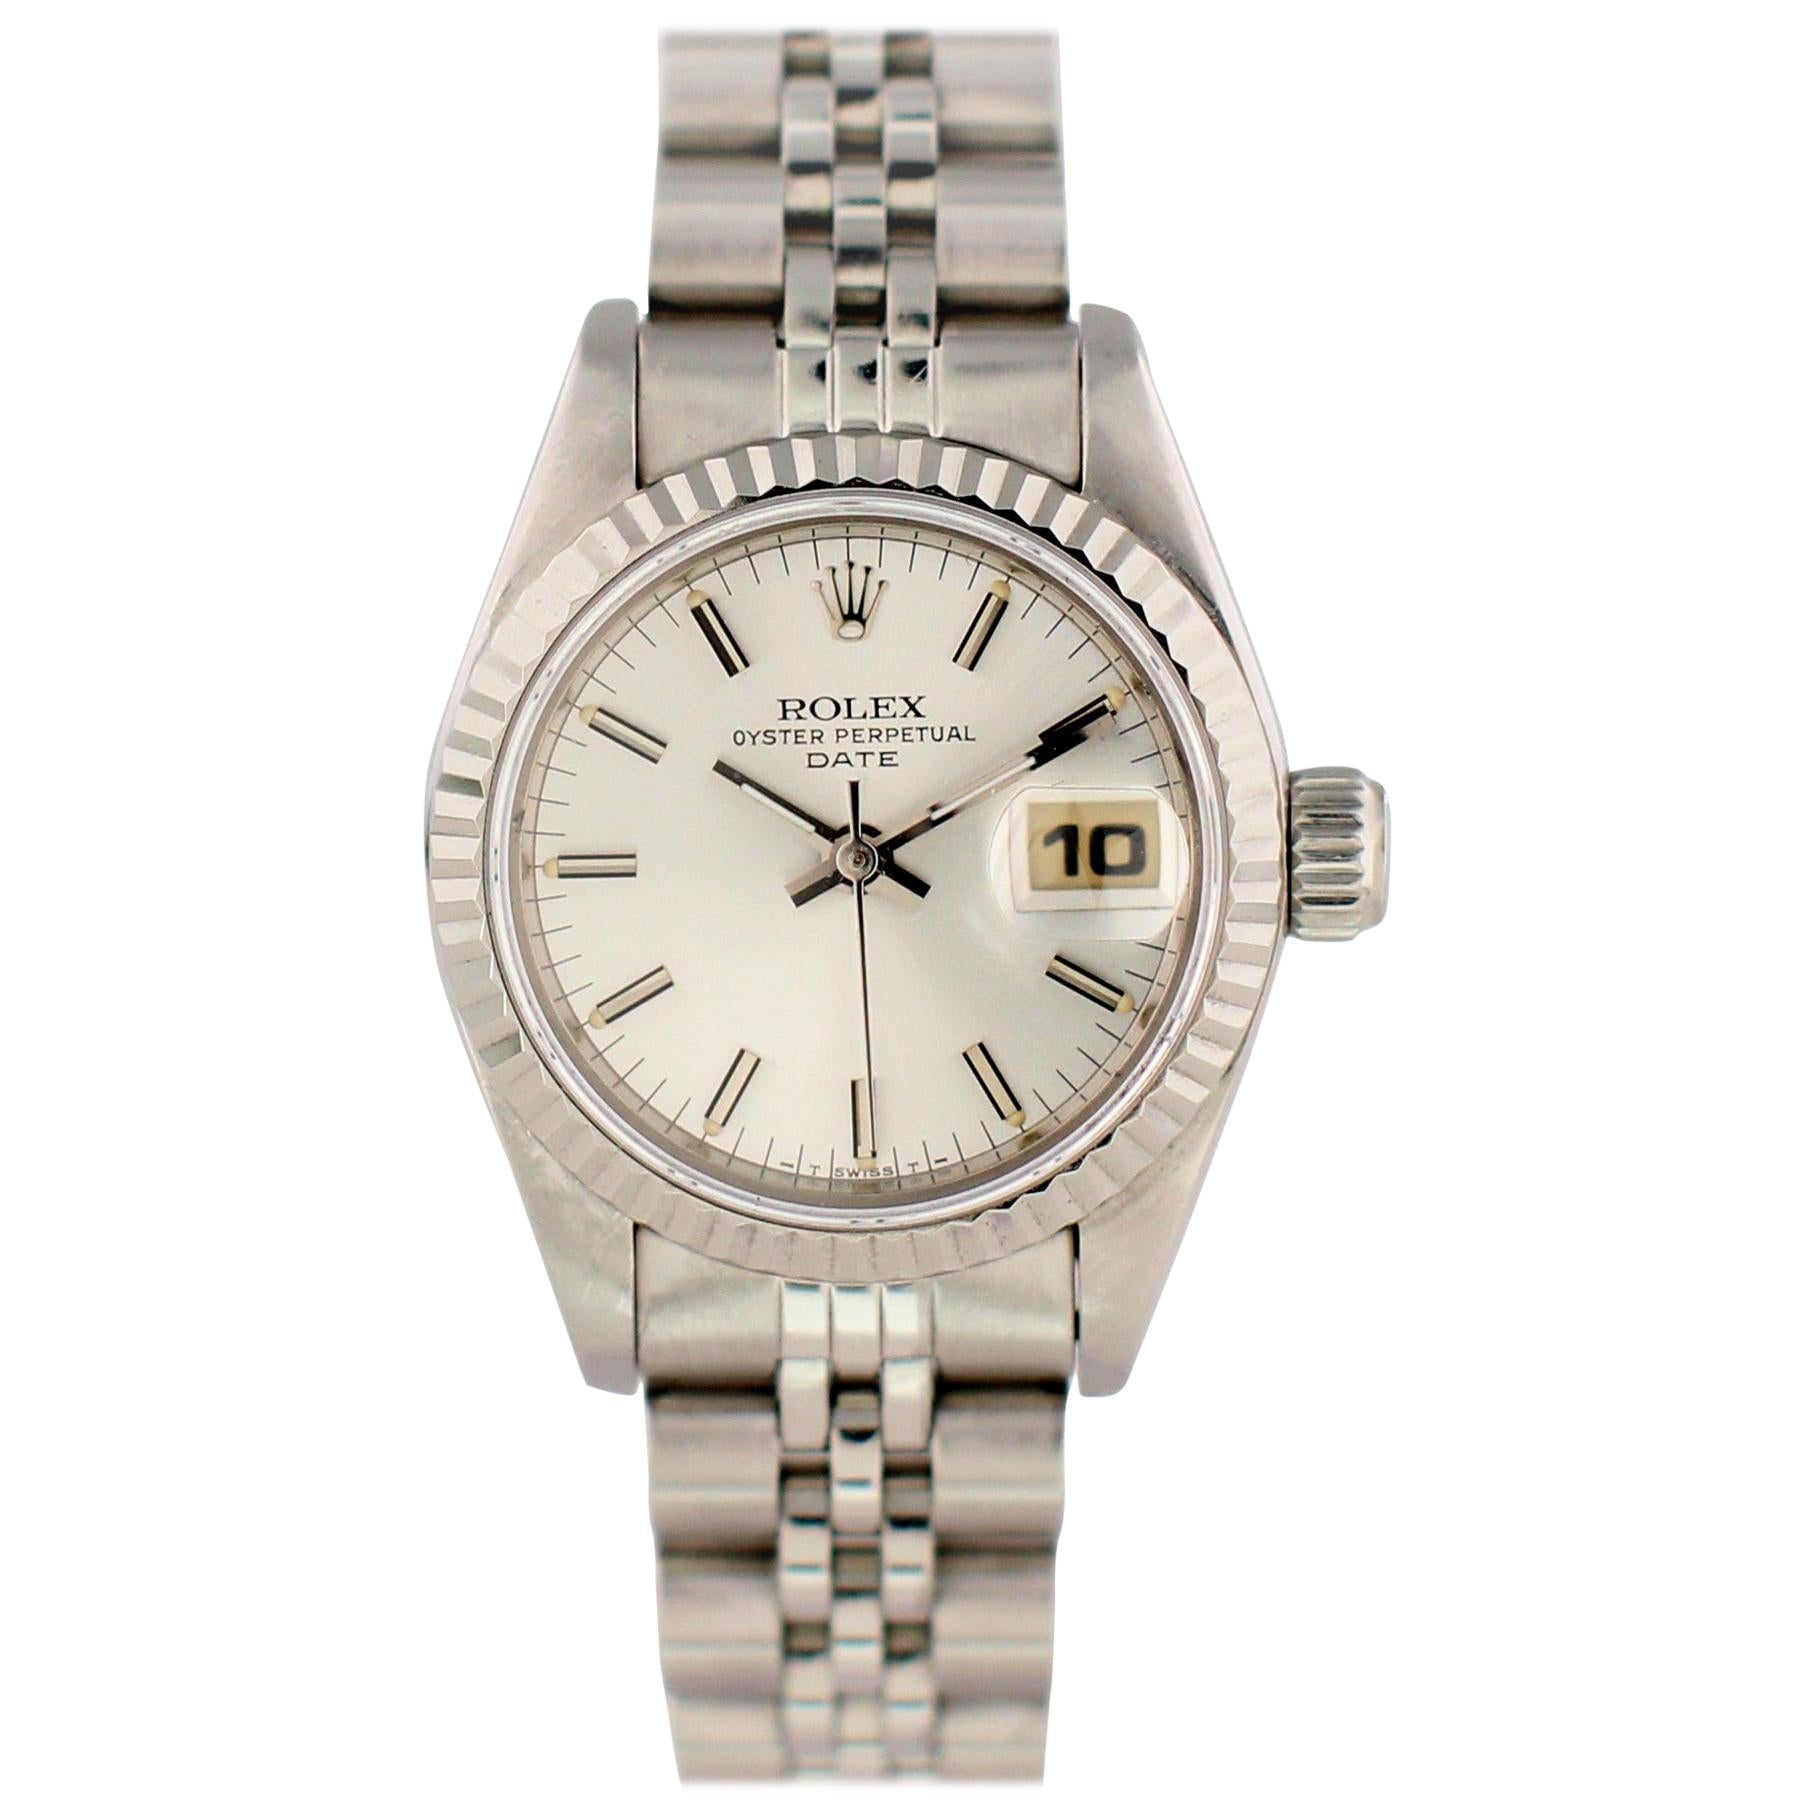 Rolex Oyster Perpetual Datejust 69174 Ladies Watch For Sale